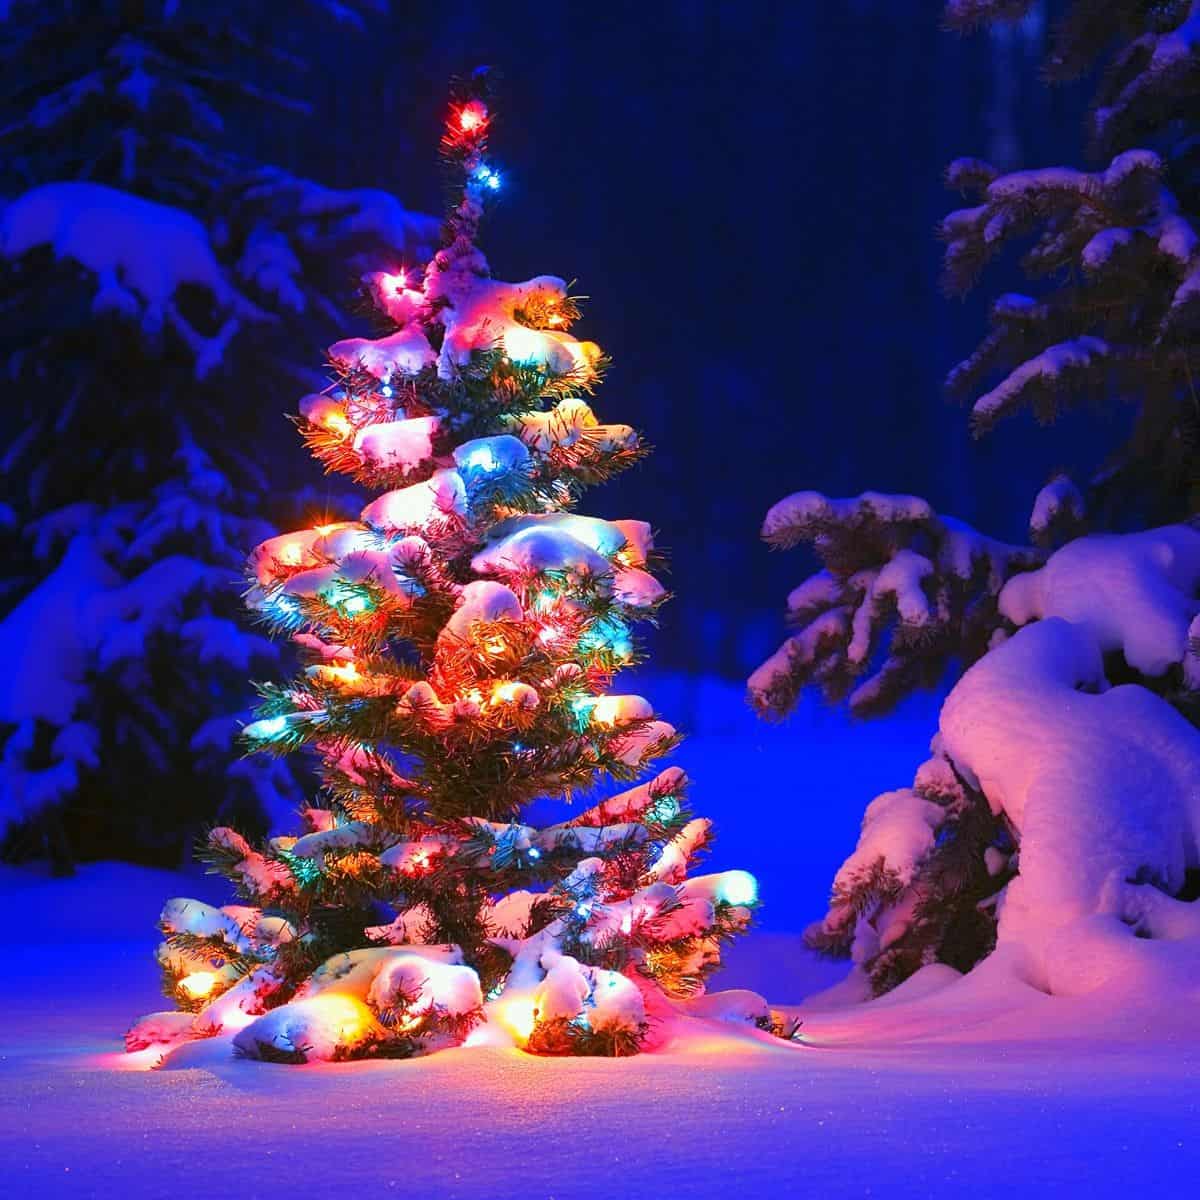 A snow covered tree is outside in the winter at nighttime. Lights are on the tree casting a multi-colored glow.